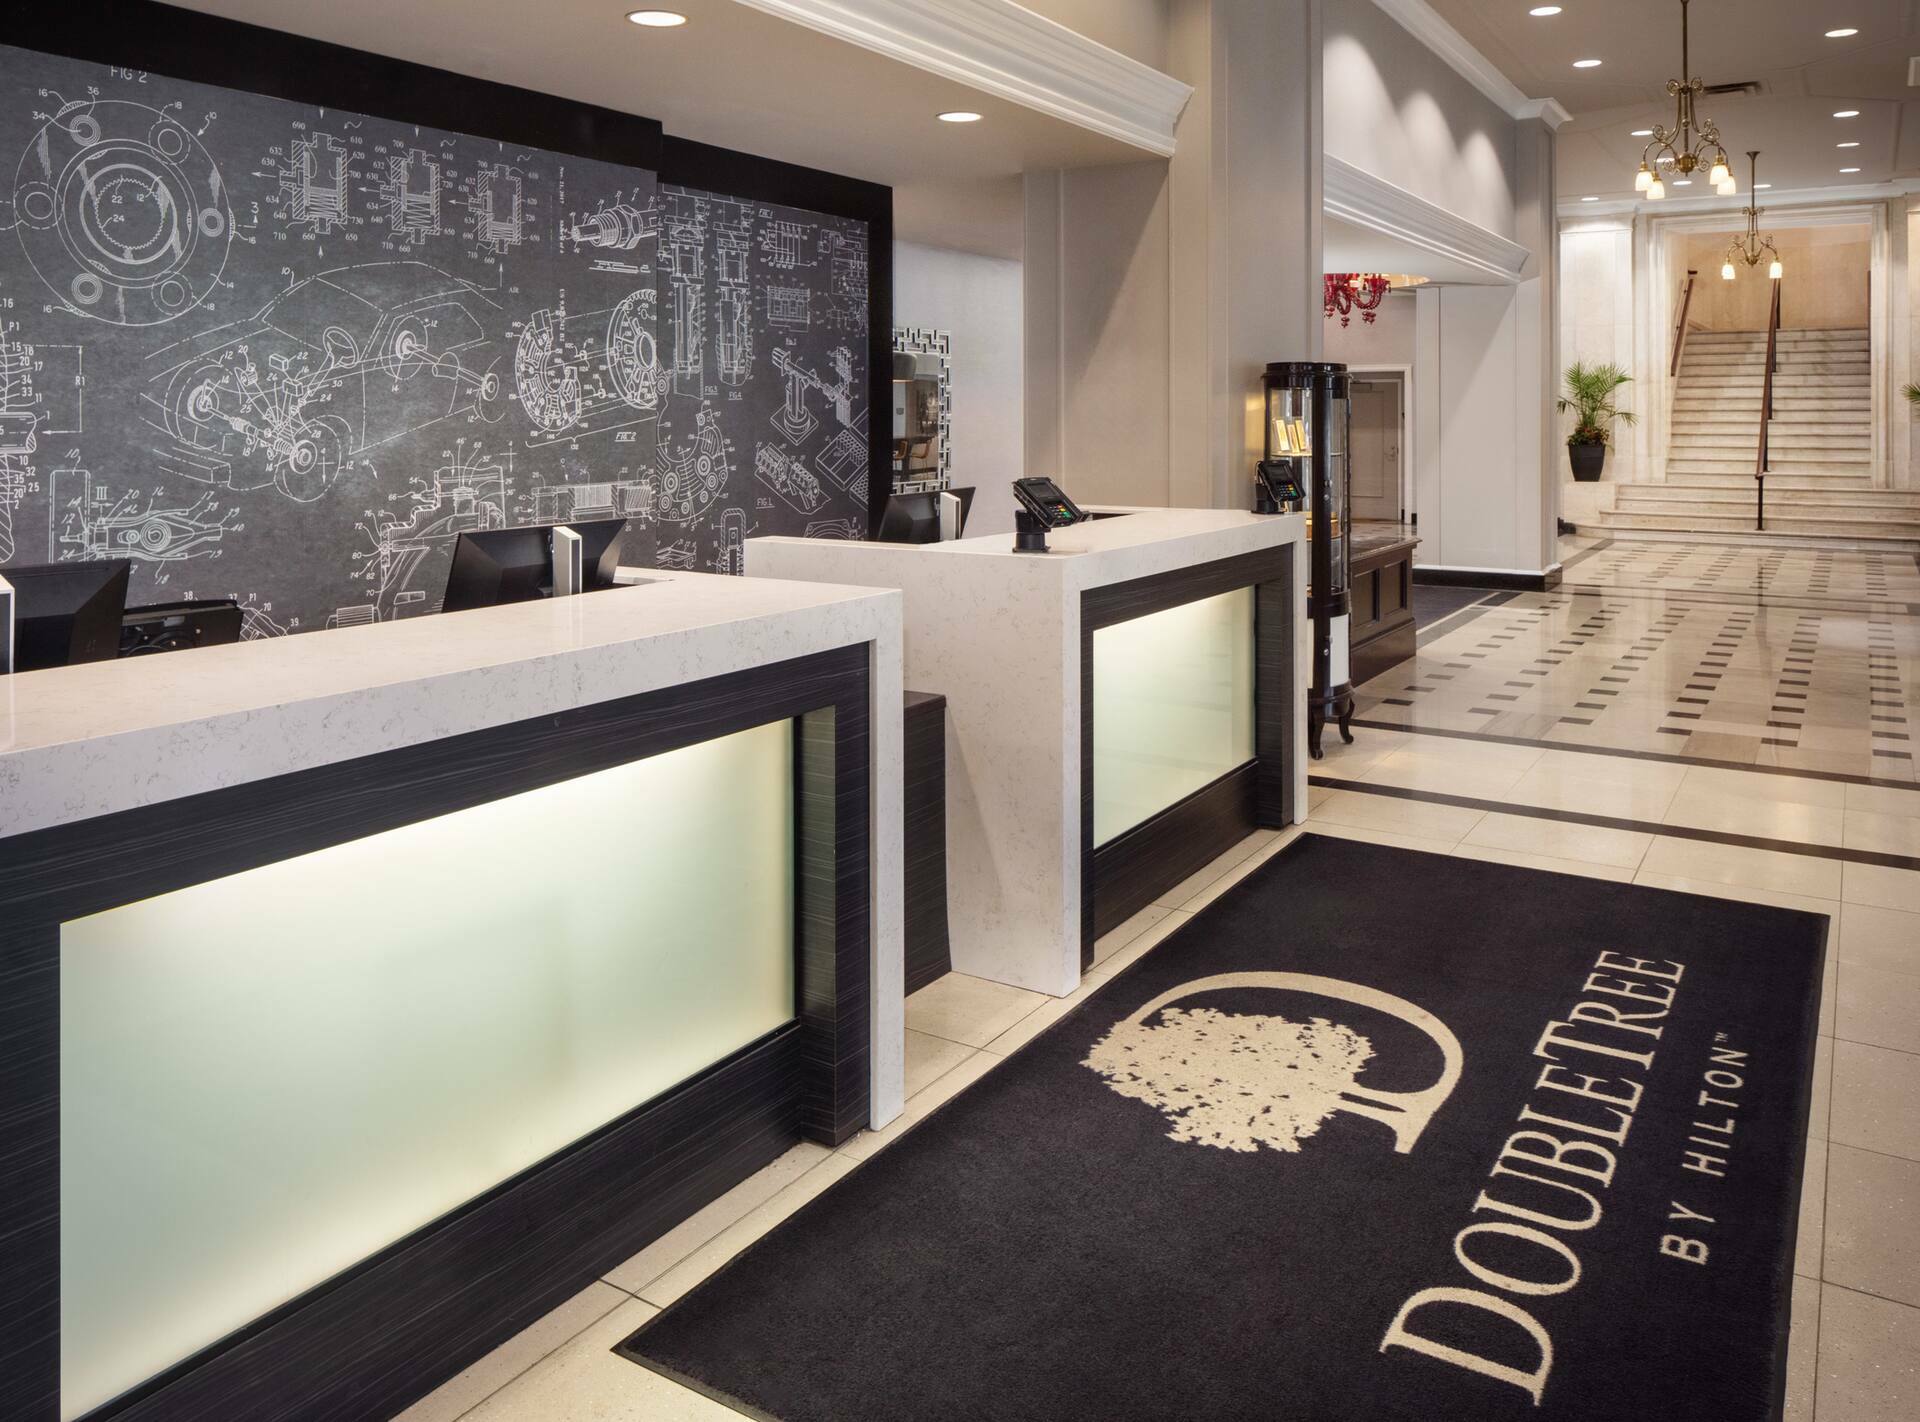 Photo of DoubleTree Suites by Hilton Hotel Detroit Downtown - Fort Shelby, Detroit, MI